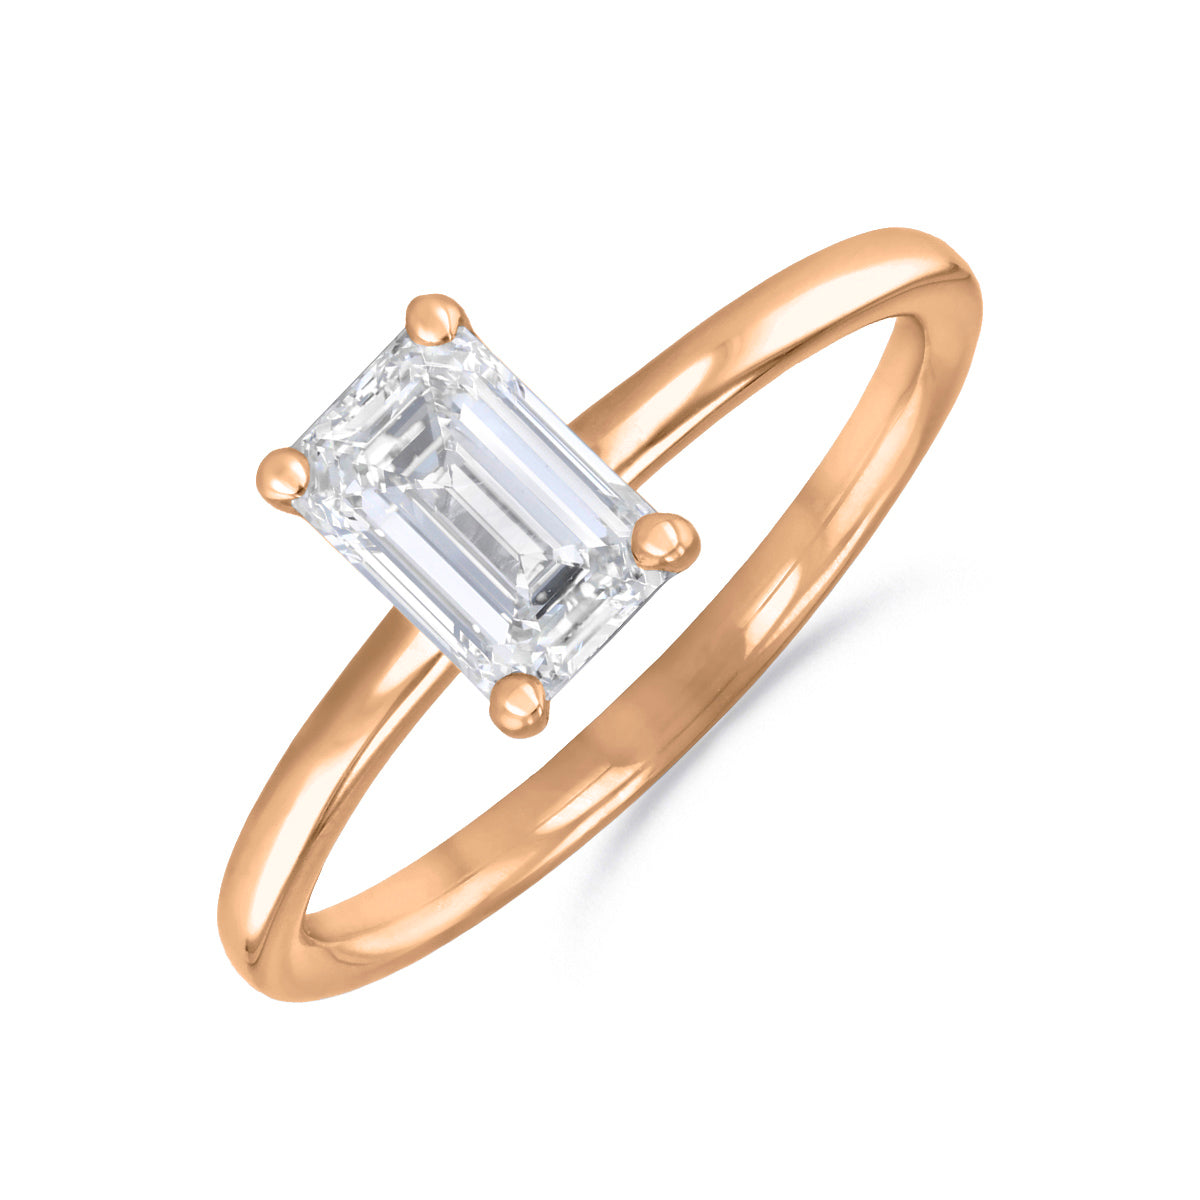 2-00ct-sofia-emerald-cut-solitaire-diamond-engagement-ring-18ct-rose-gold